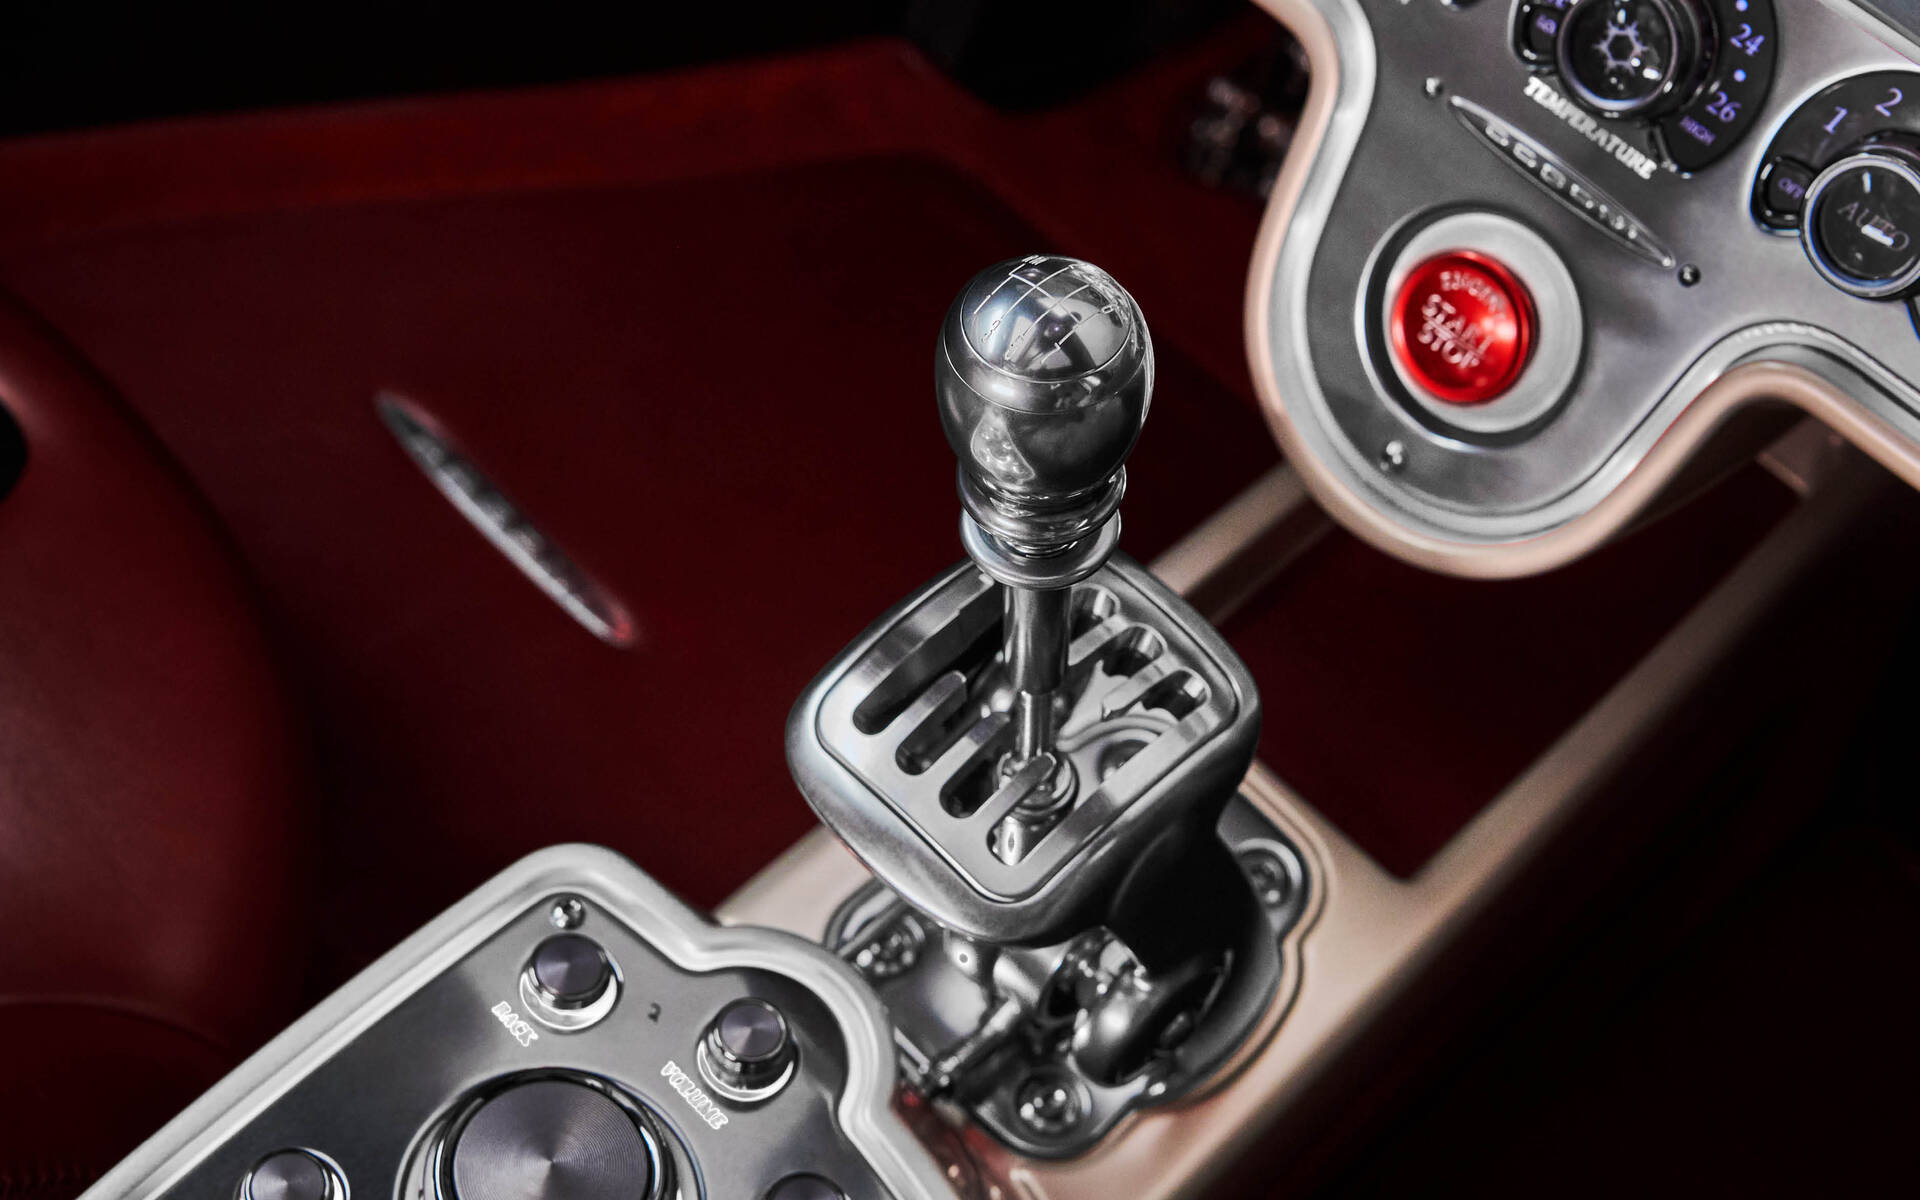 The exposed shifter of the Pagani Utopia